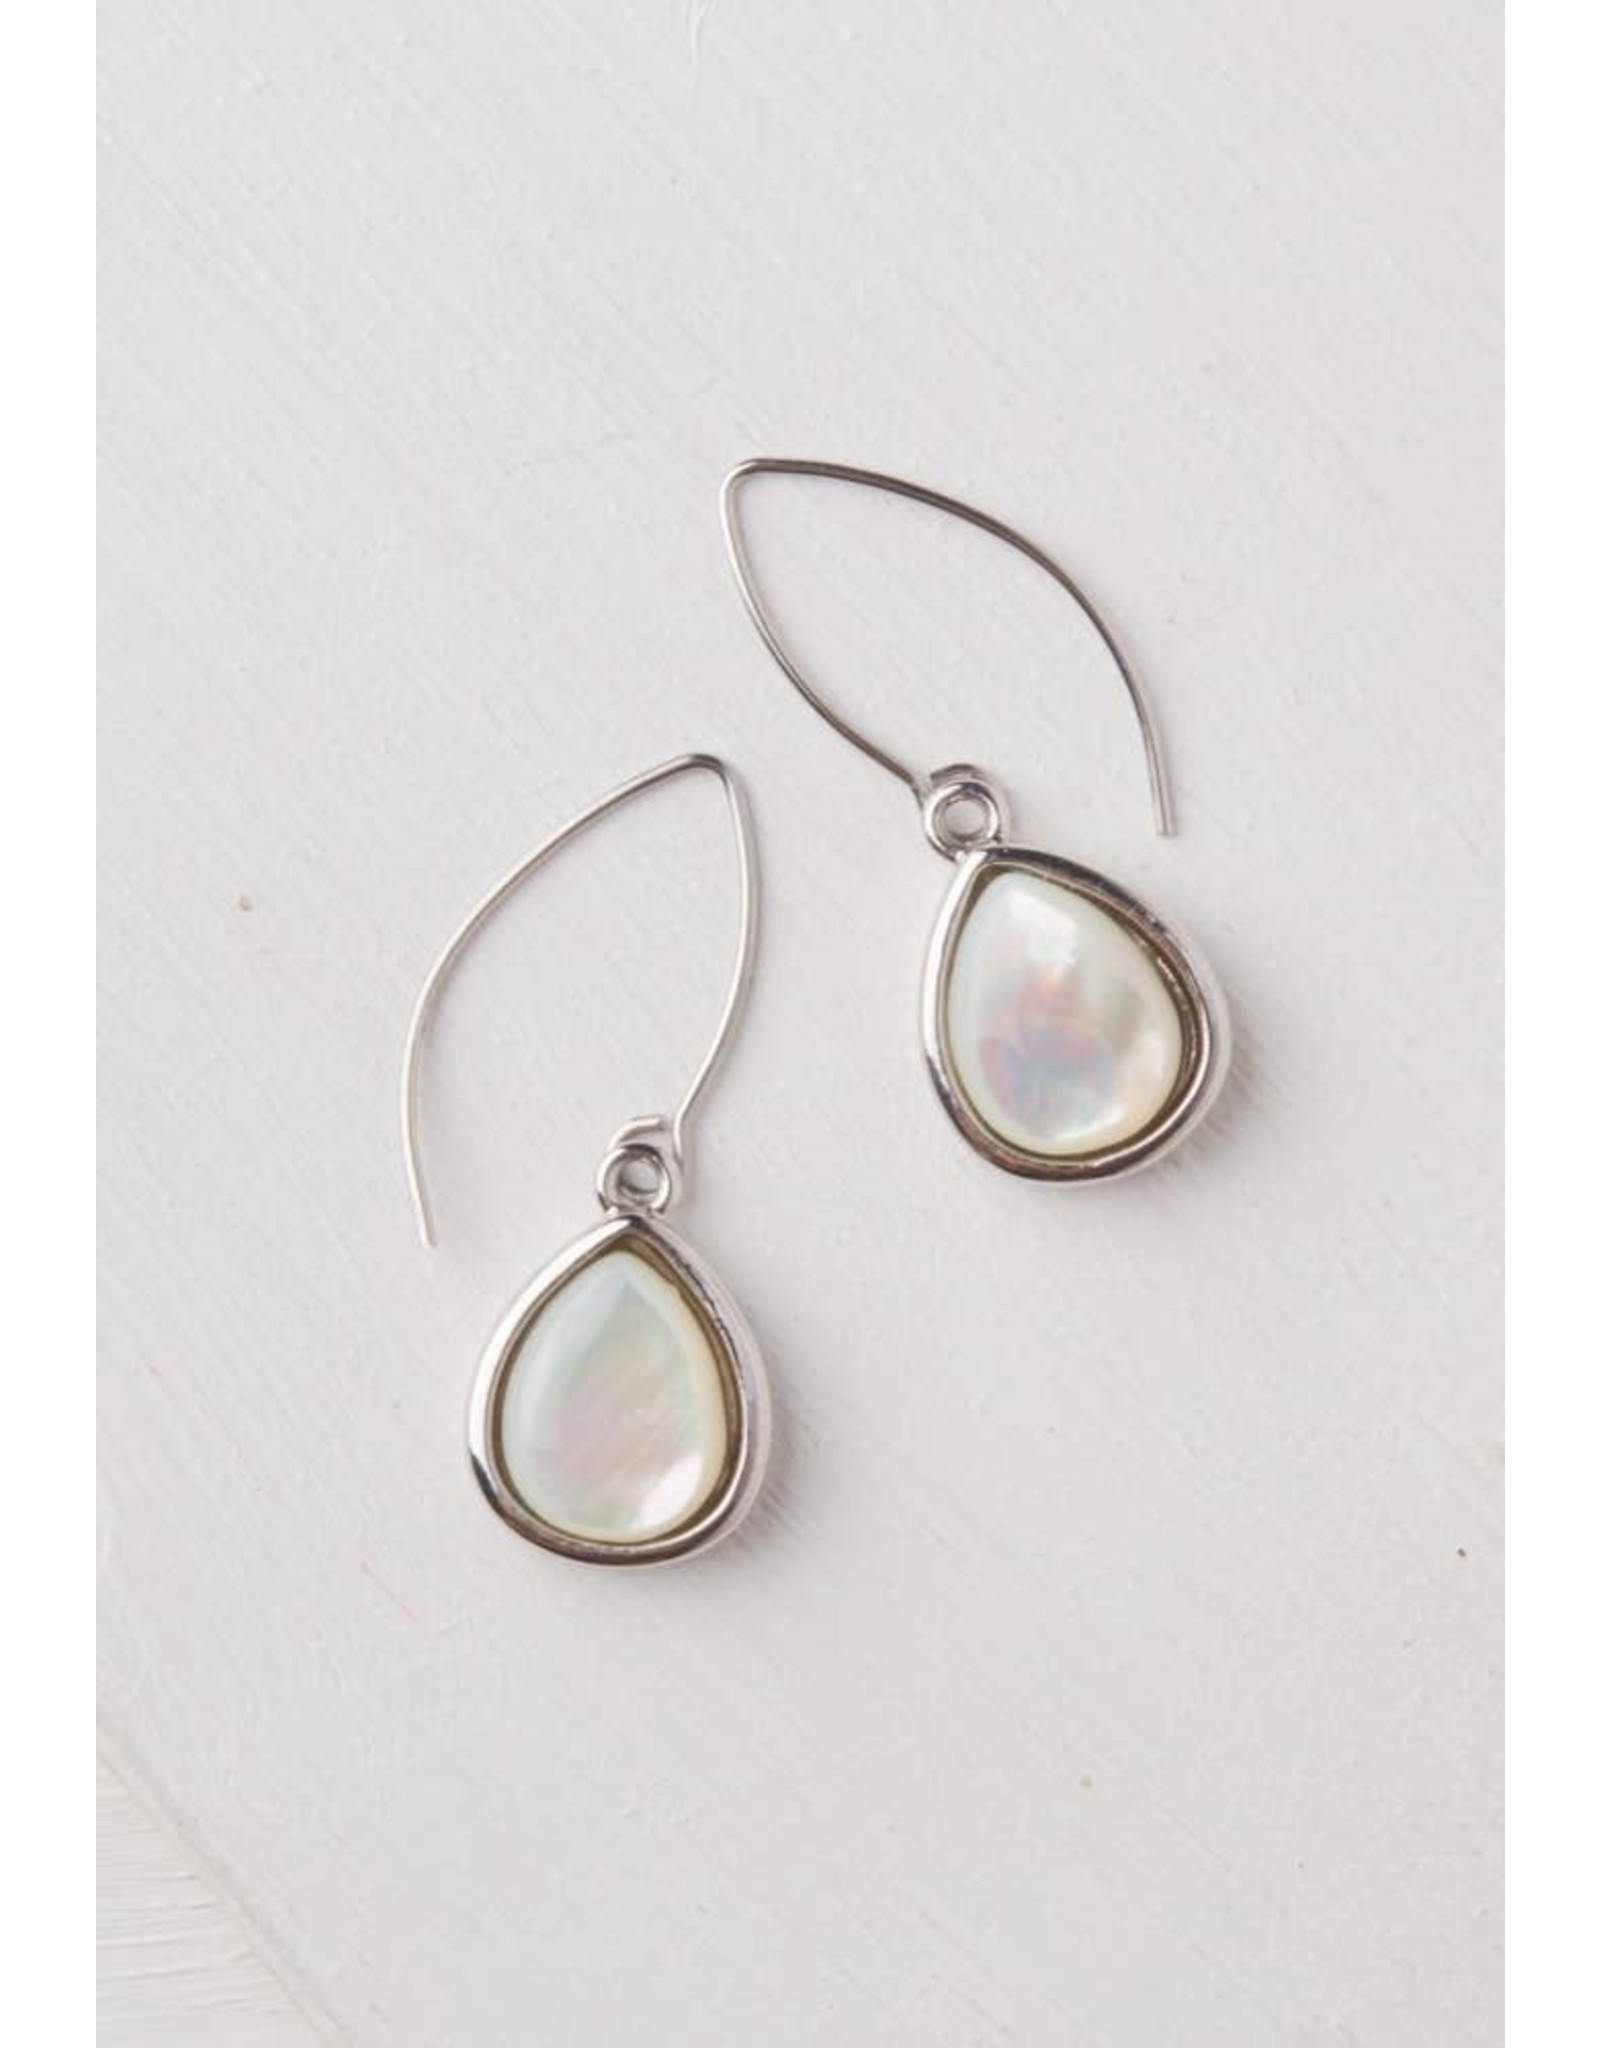 Charity Silver Mother of Pearl Earrings, Asia